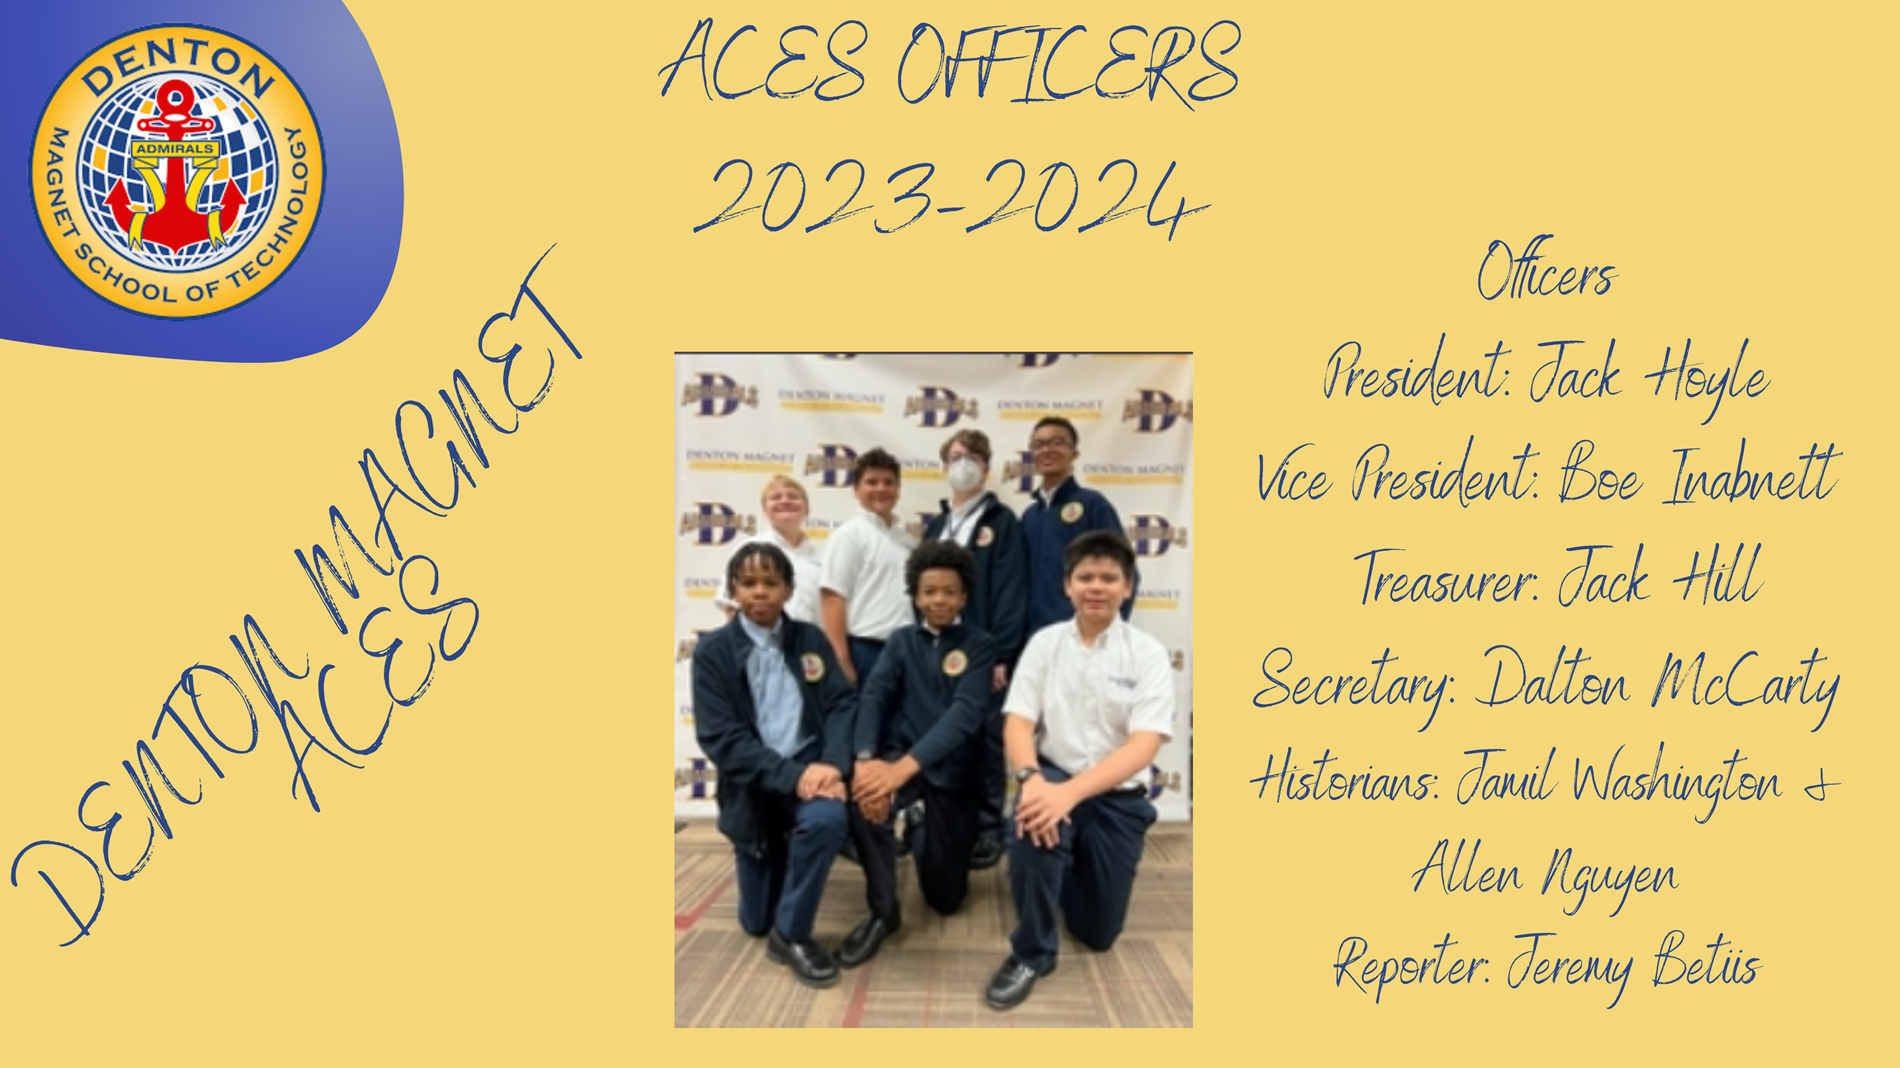 ACES officers